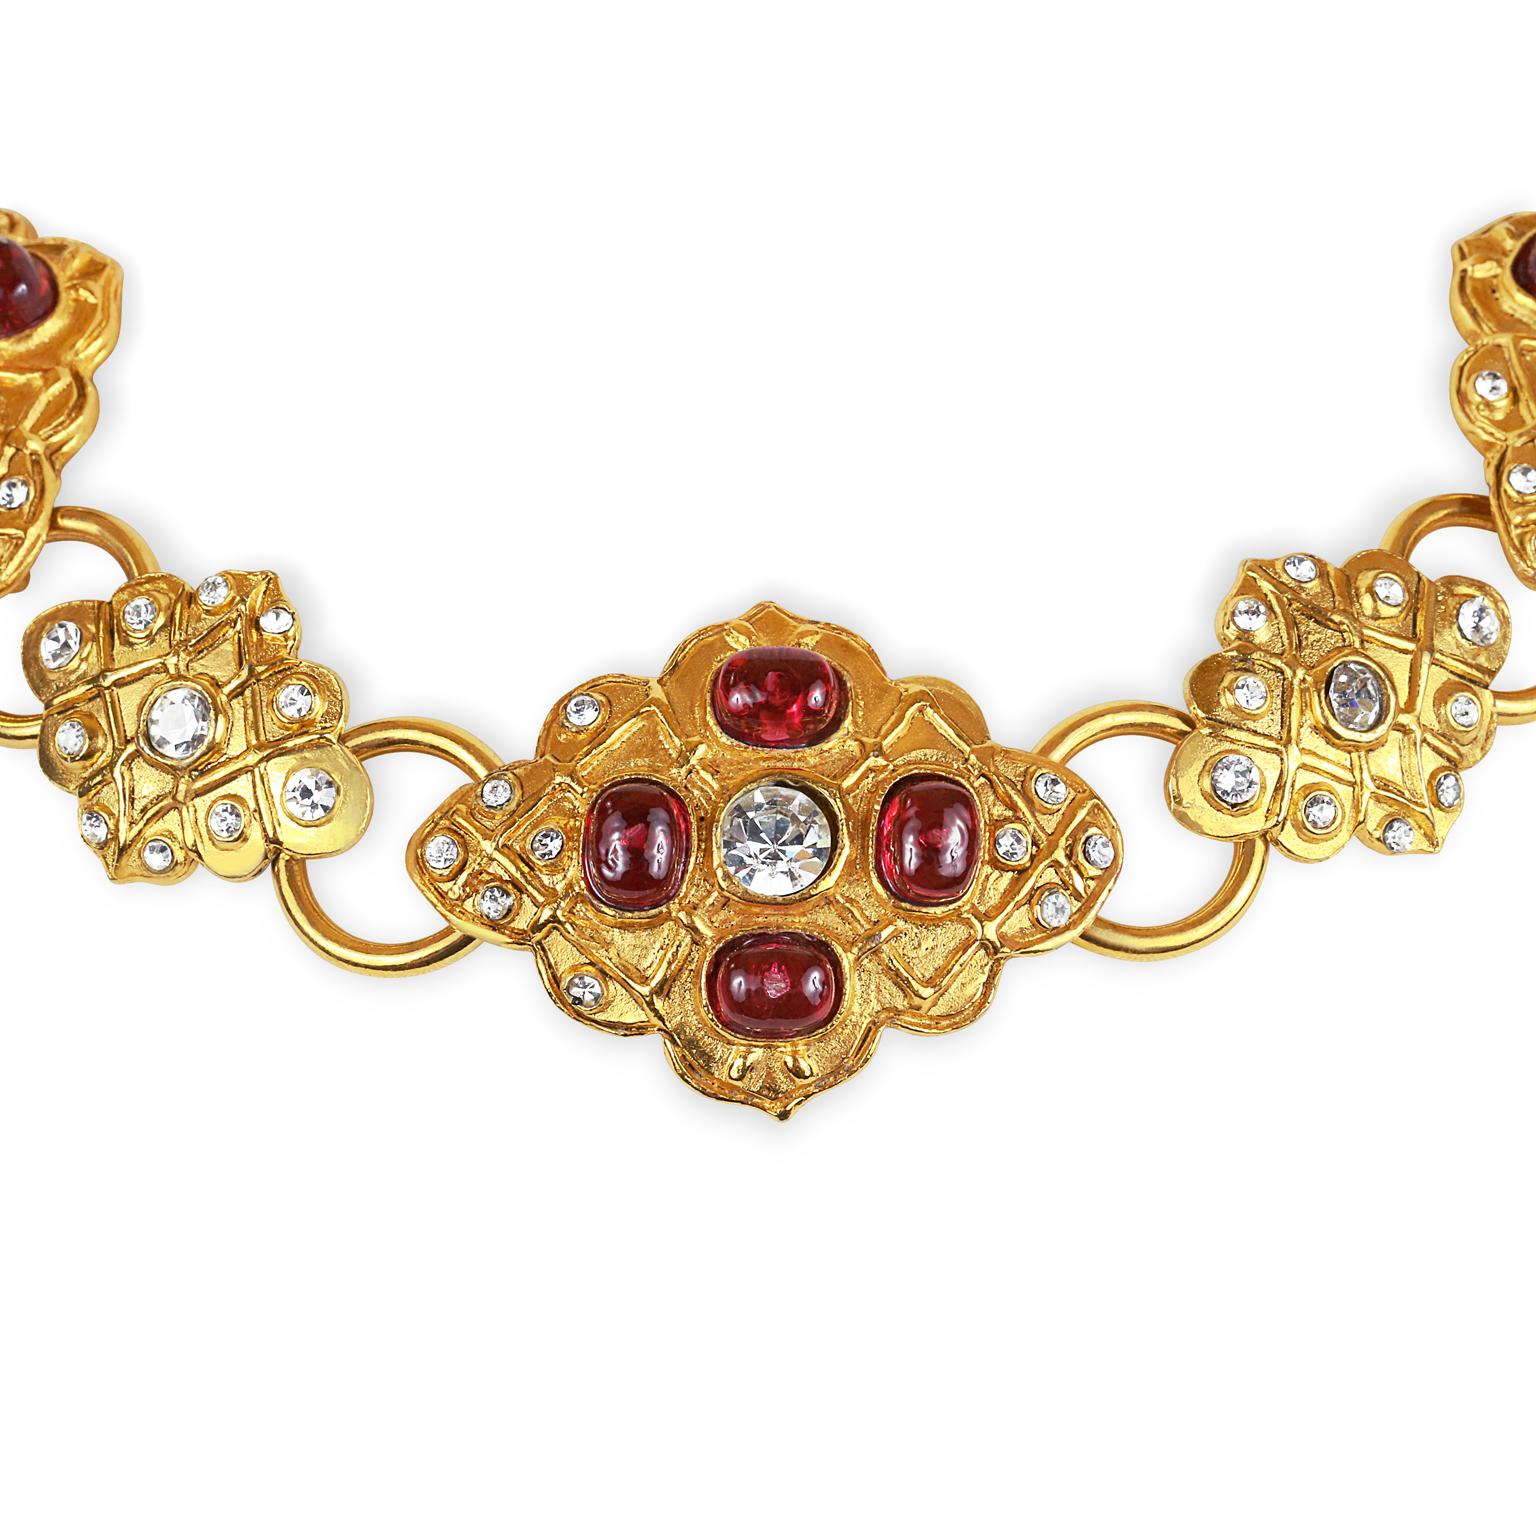 This authentic Chanel Red Gripoix and Crystal Choker is in excellent vintage condition.  Extremely rare, this is an early Chanel design.  
Gold medallions adorned with red Gripoix glass stones and crystals are connected together with smaller